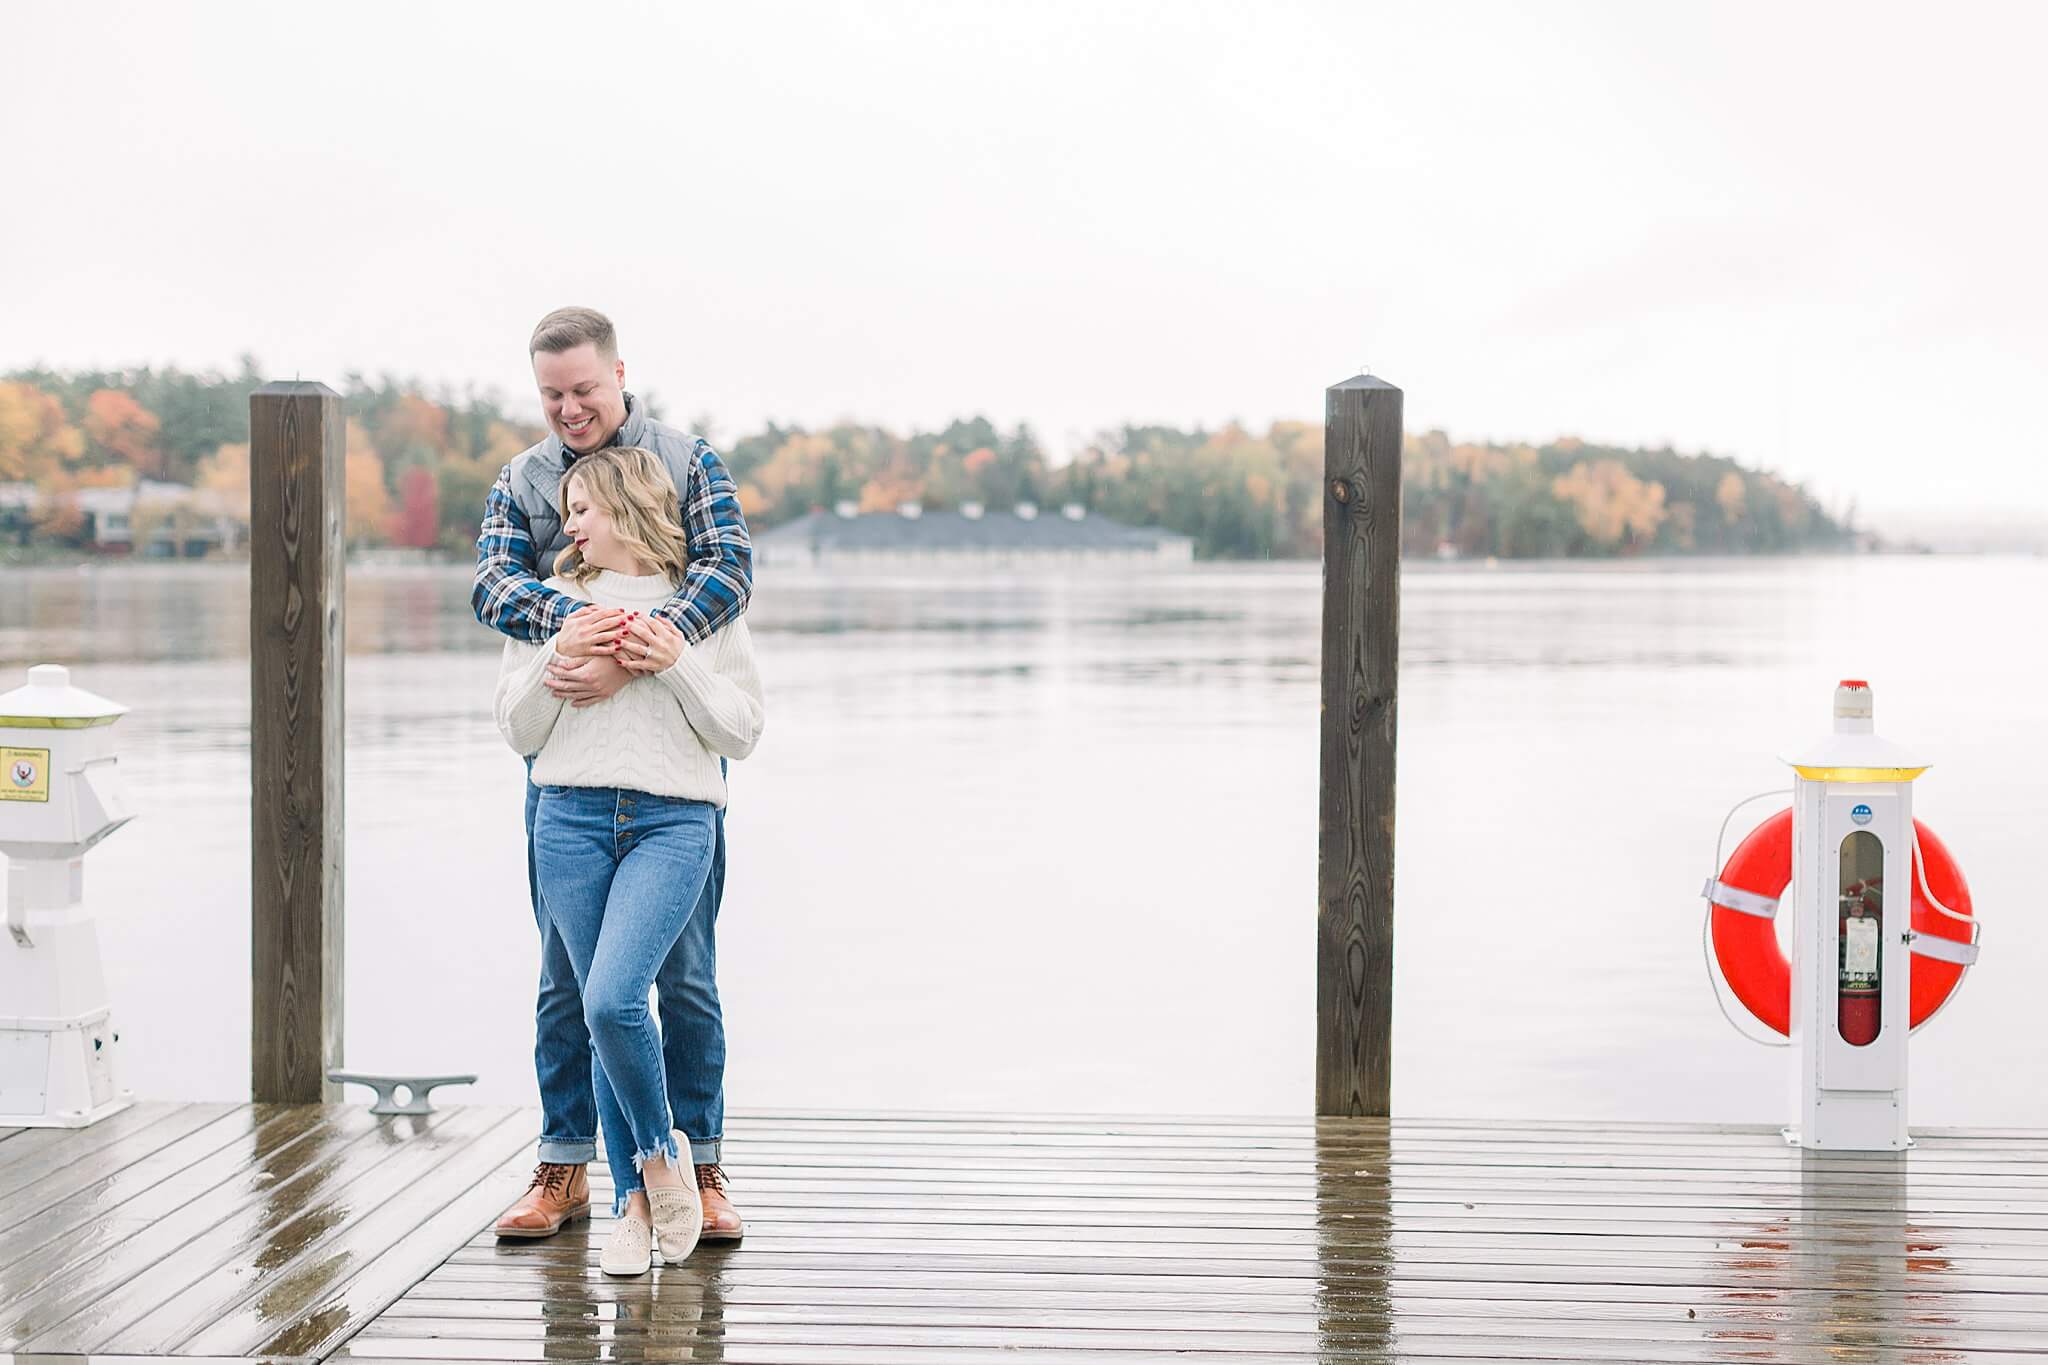 Bride and groom snuggle on dock during rainy fall engagement session in Charlevoix, Michigan.